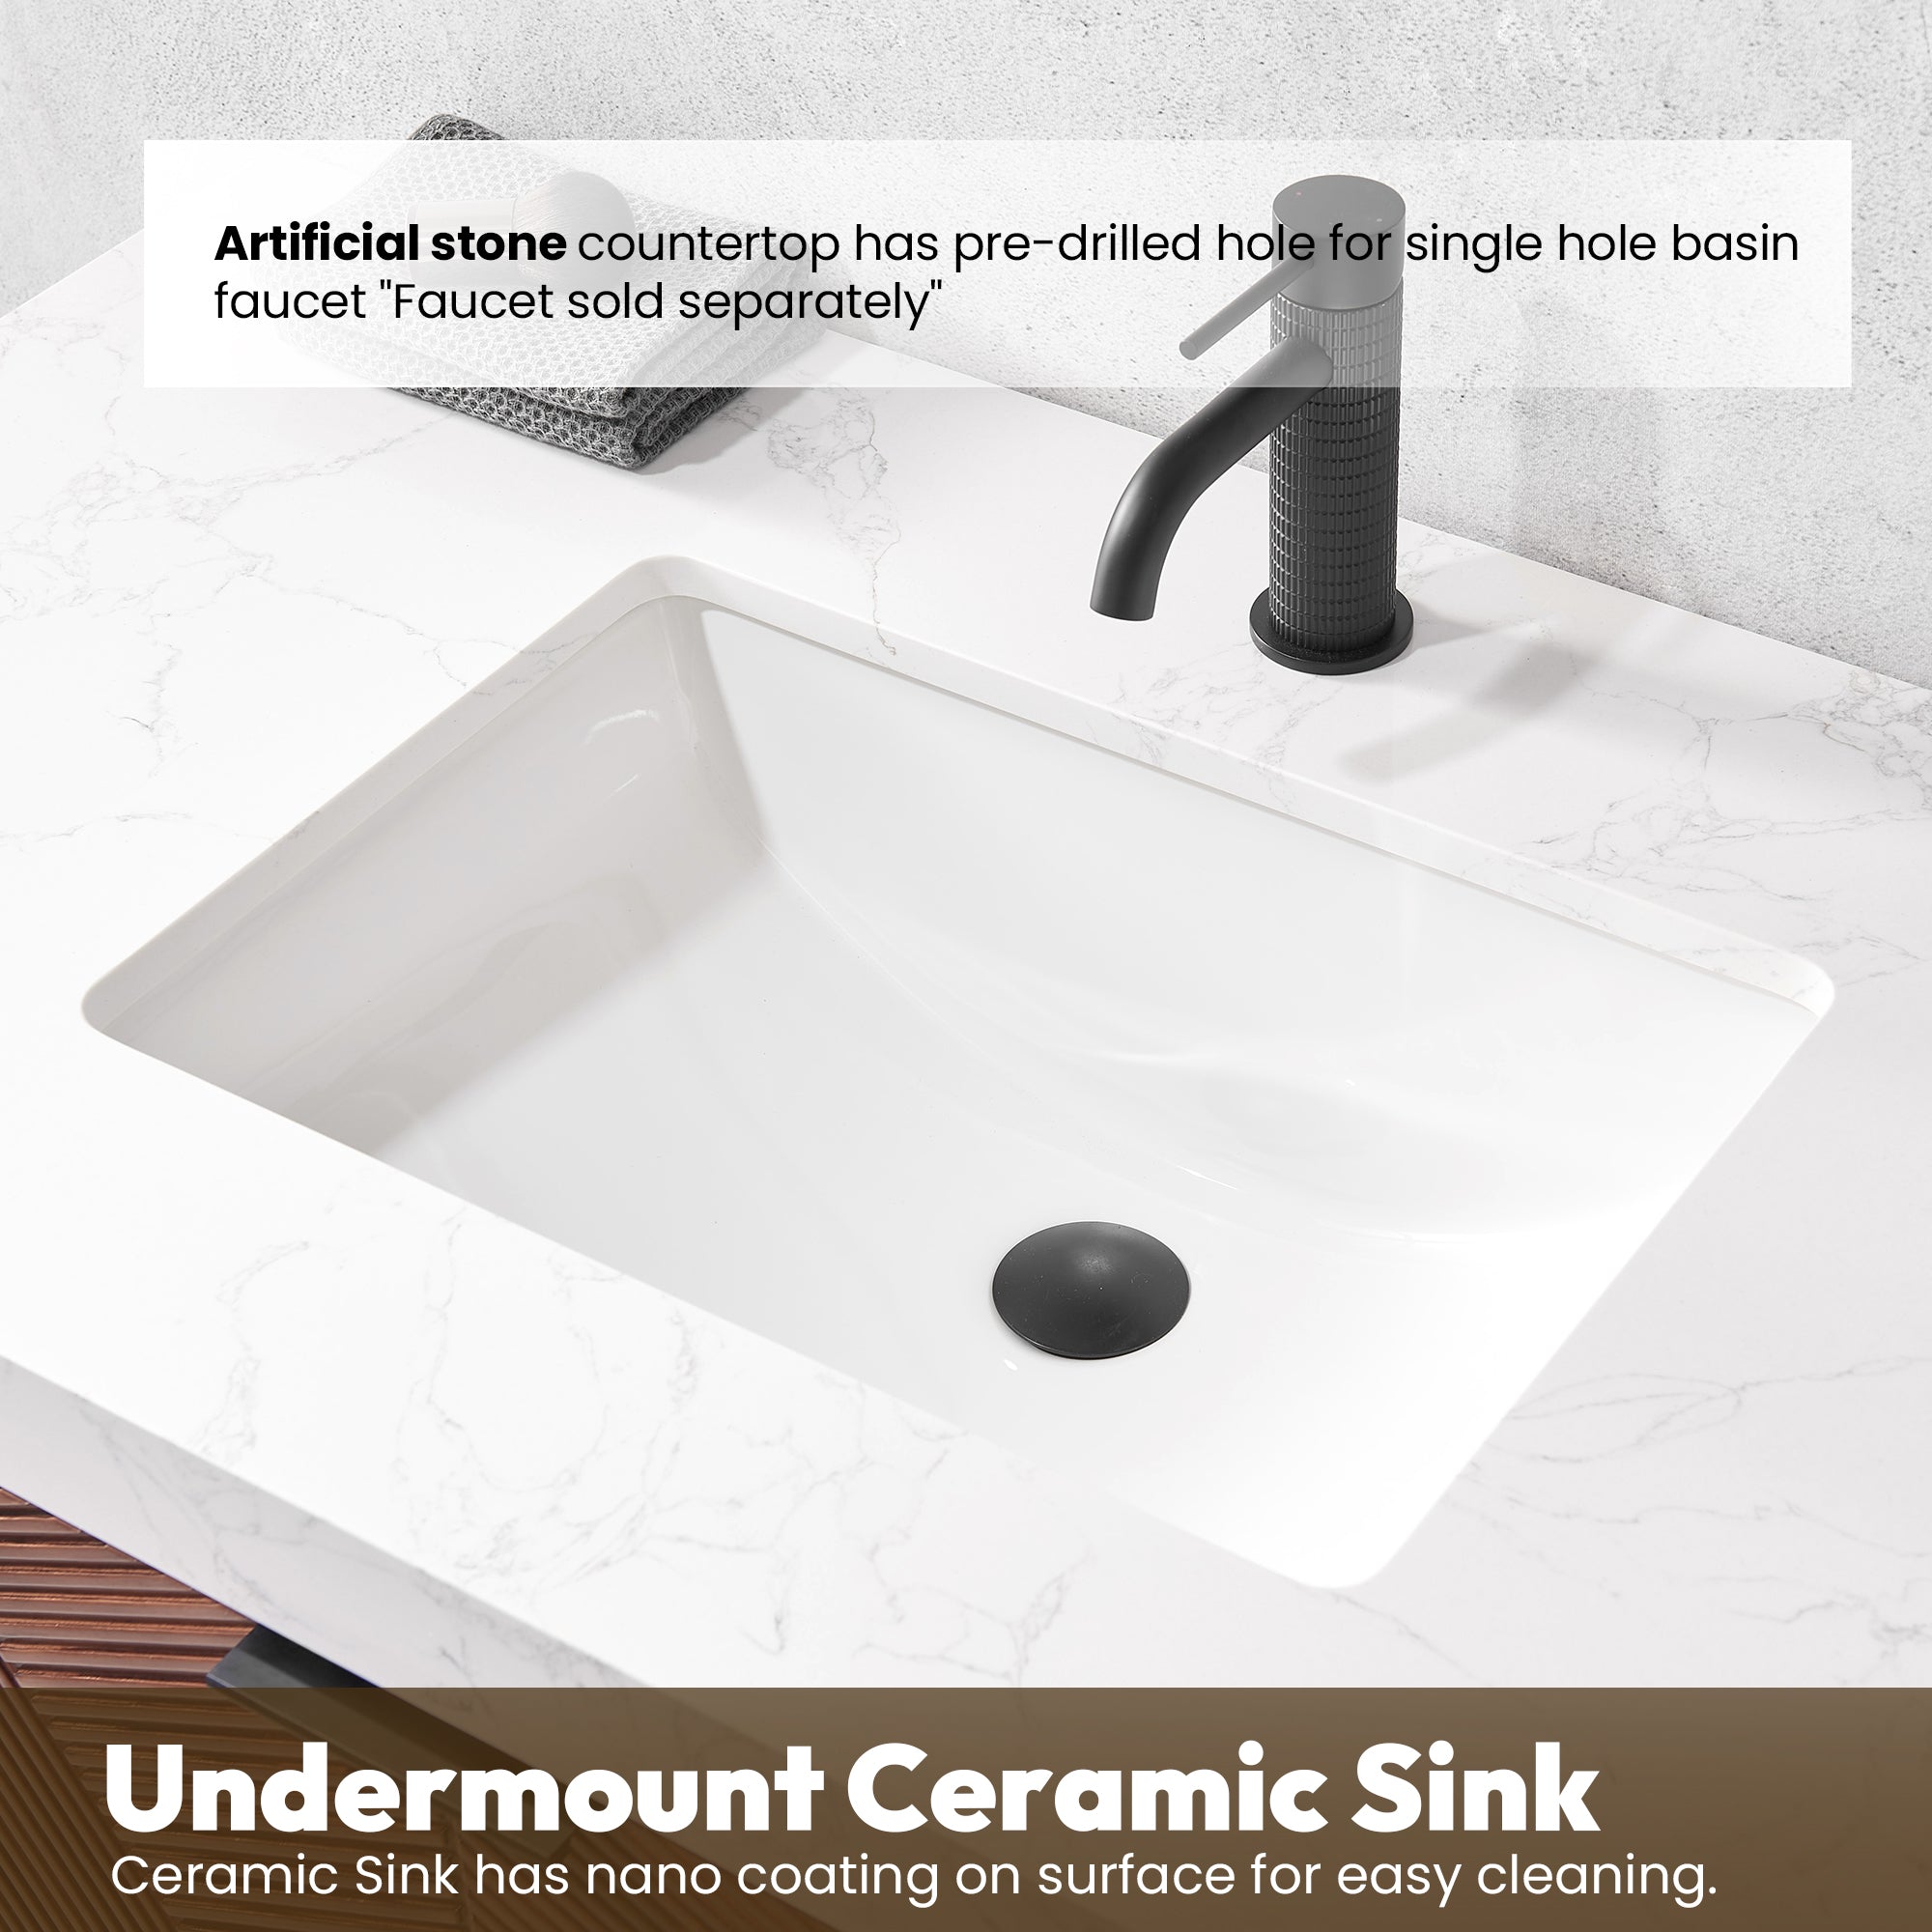 Mahon 84B" Free-standing Double Bath Vanity in North American Deep Walnut with White Grain Composite Stone Top